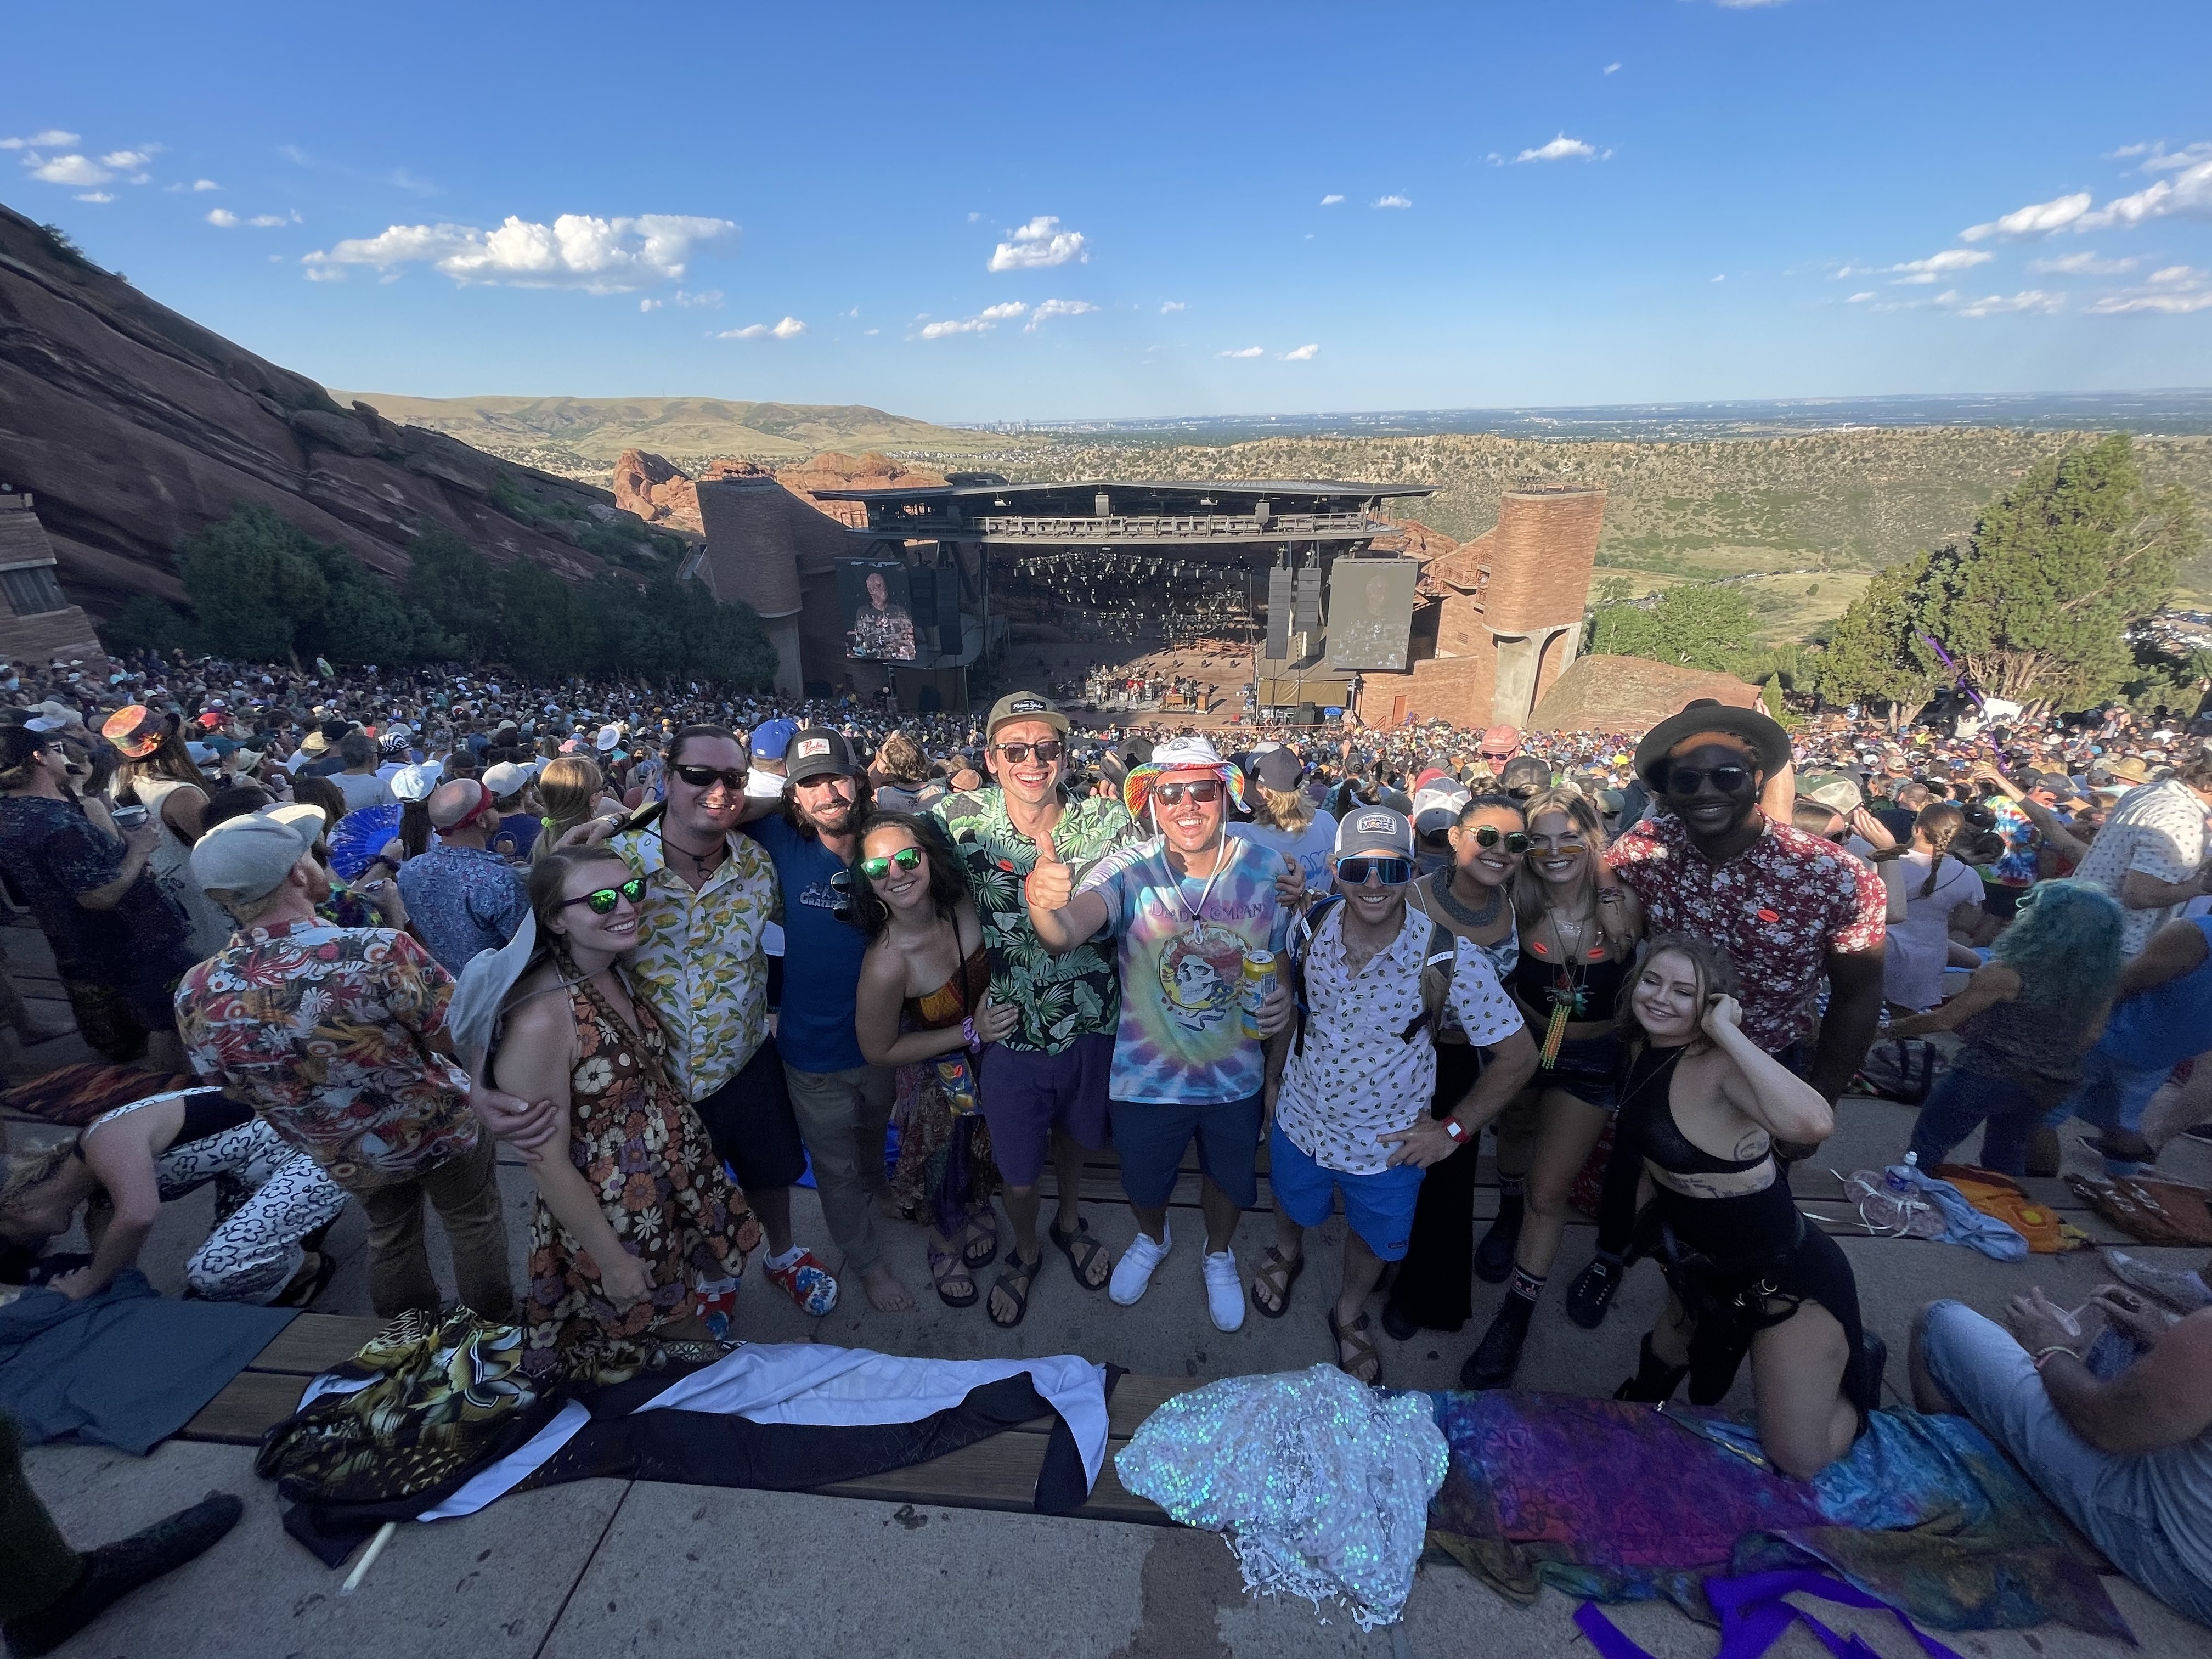 Cheese fans @ Red Rocks Amphitheatre | 7/17/22